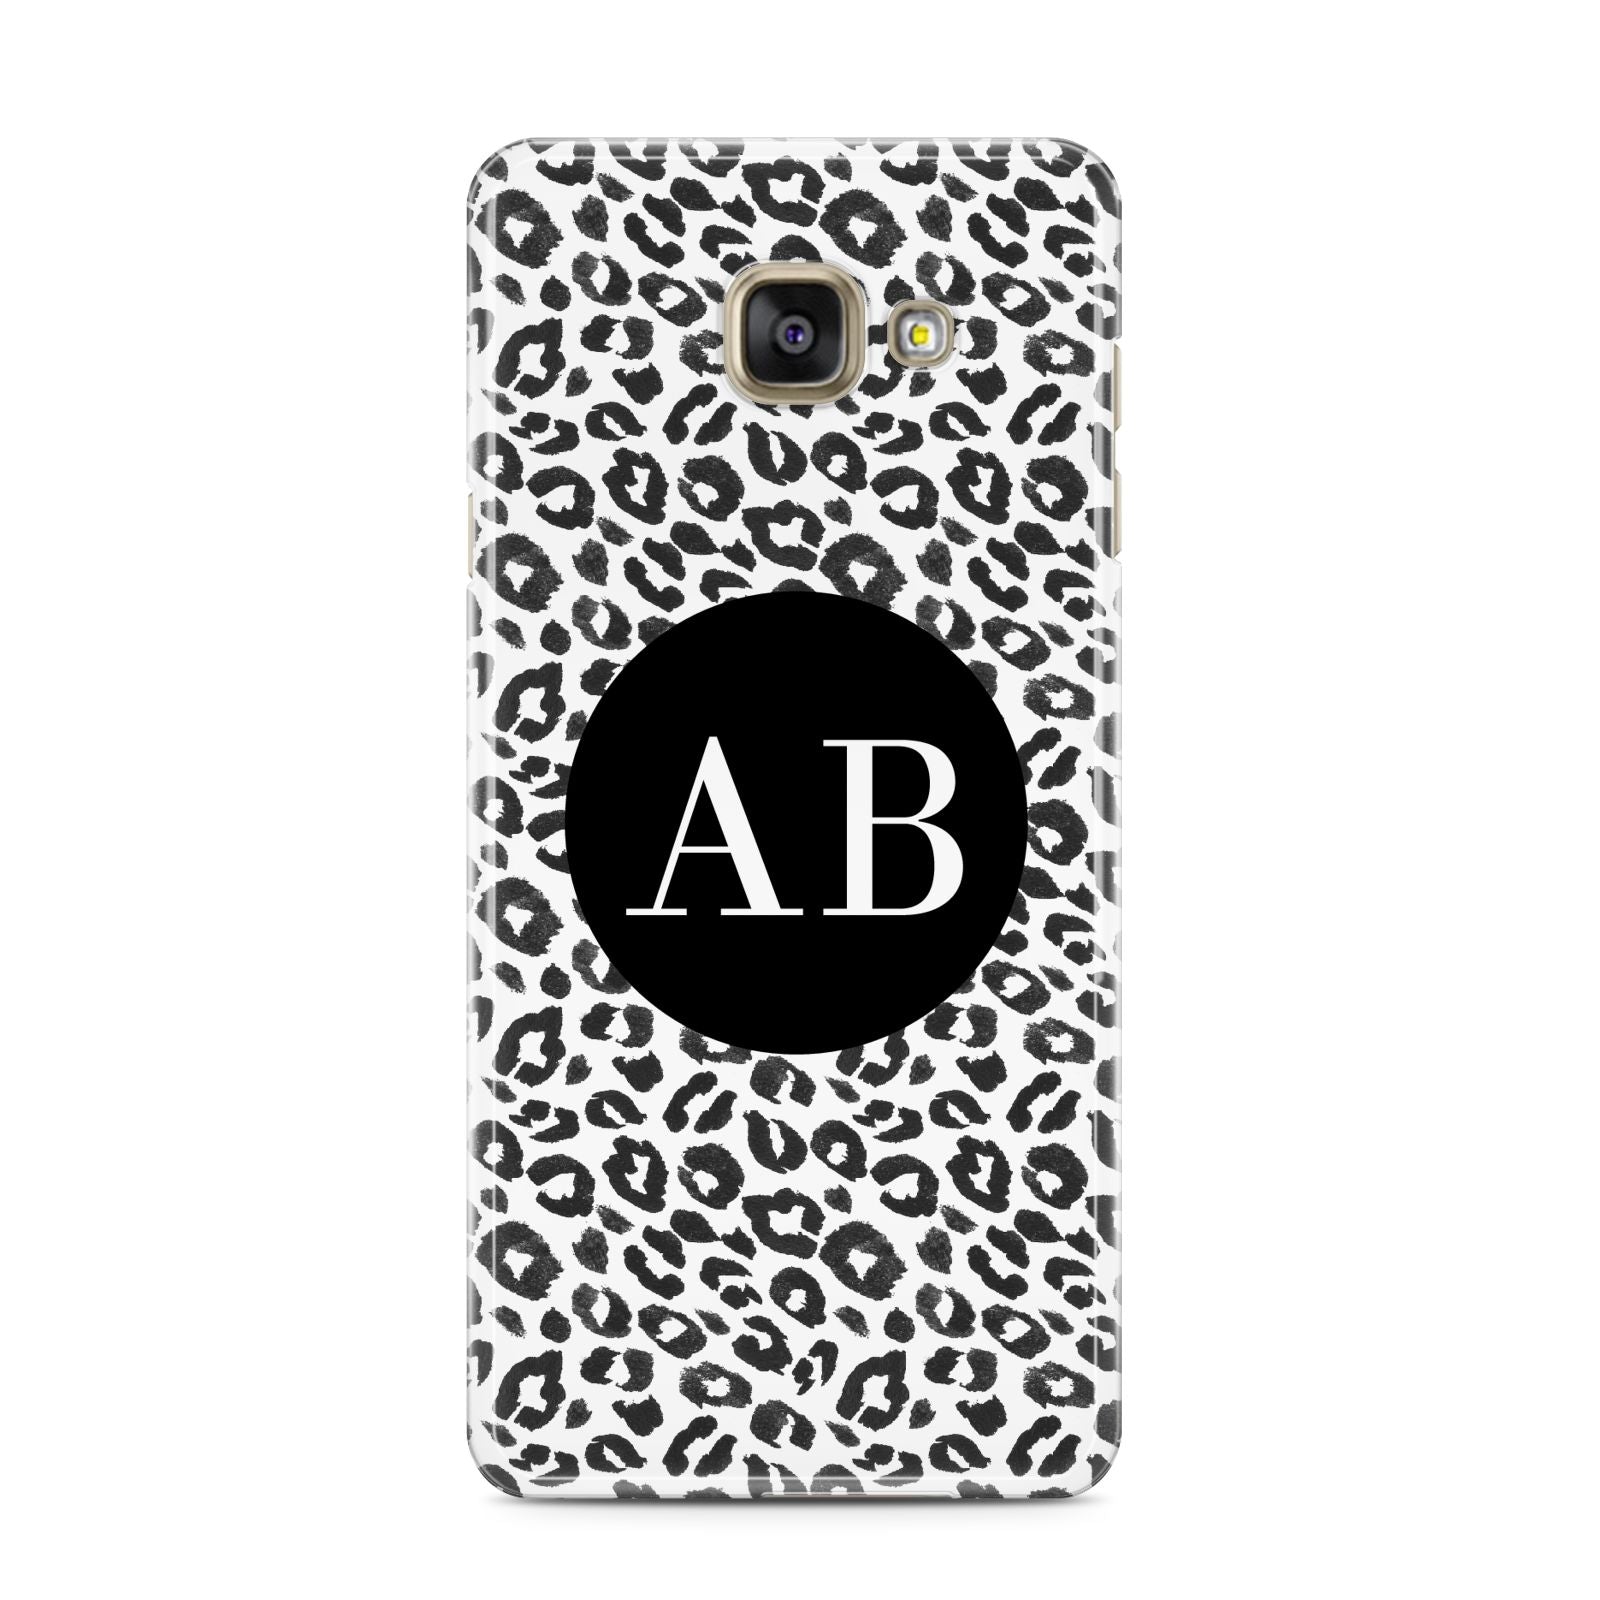 Leopard Print Black and White Samsung Galaxy A3 2016 Case on gold phone